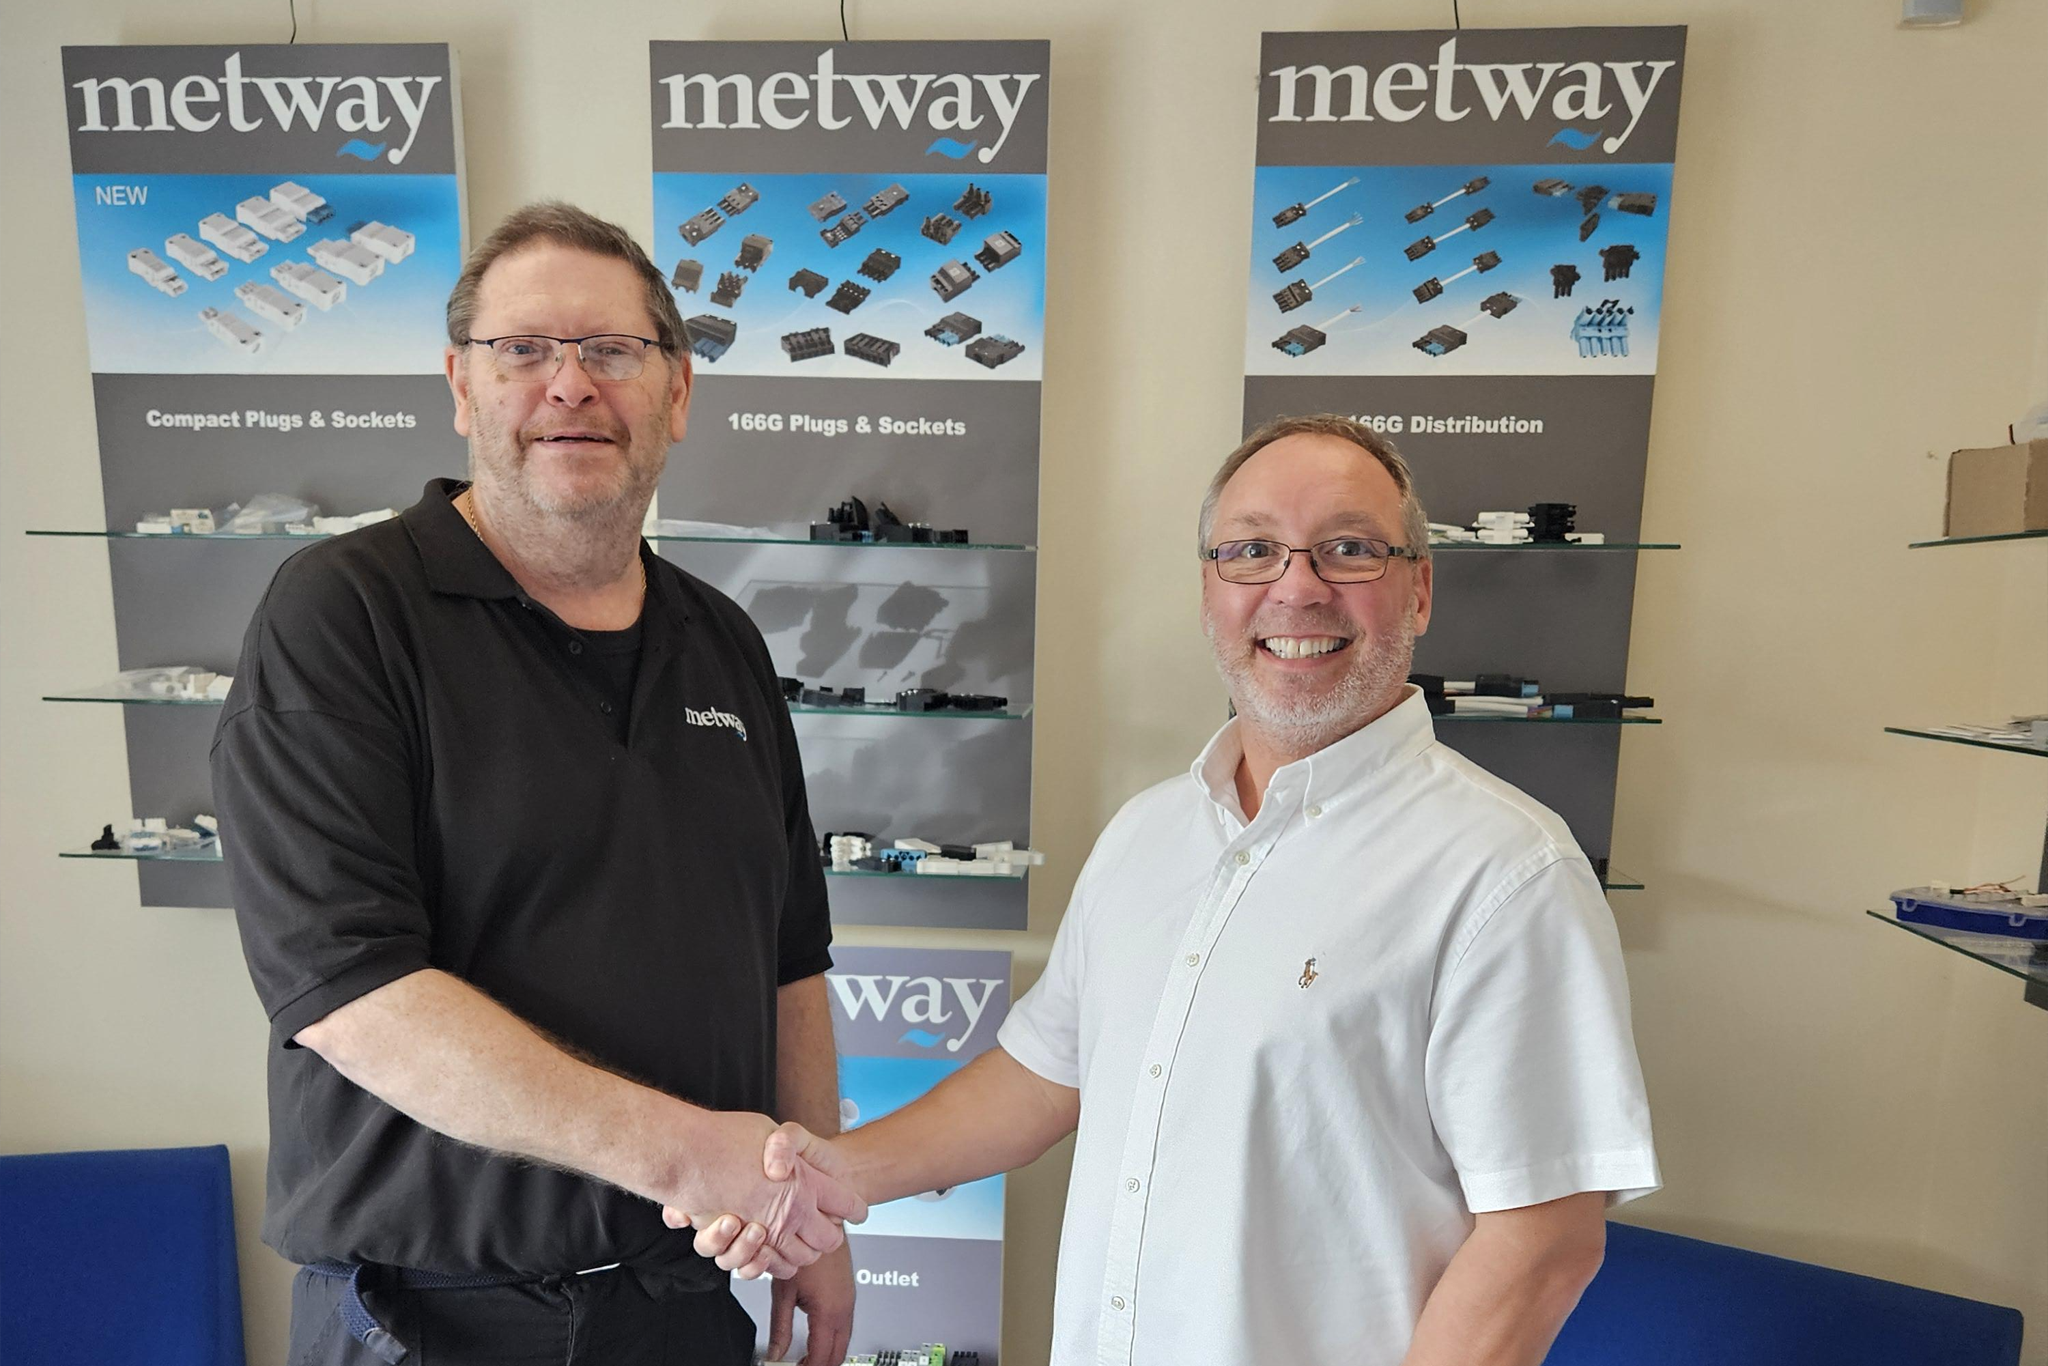 40 years service at Metway